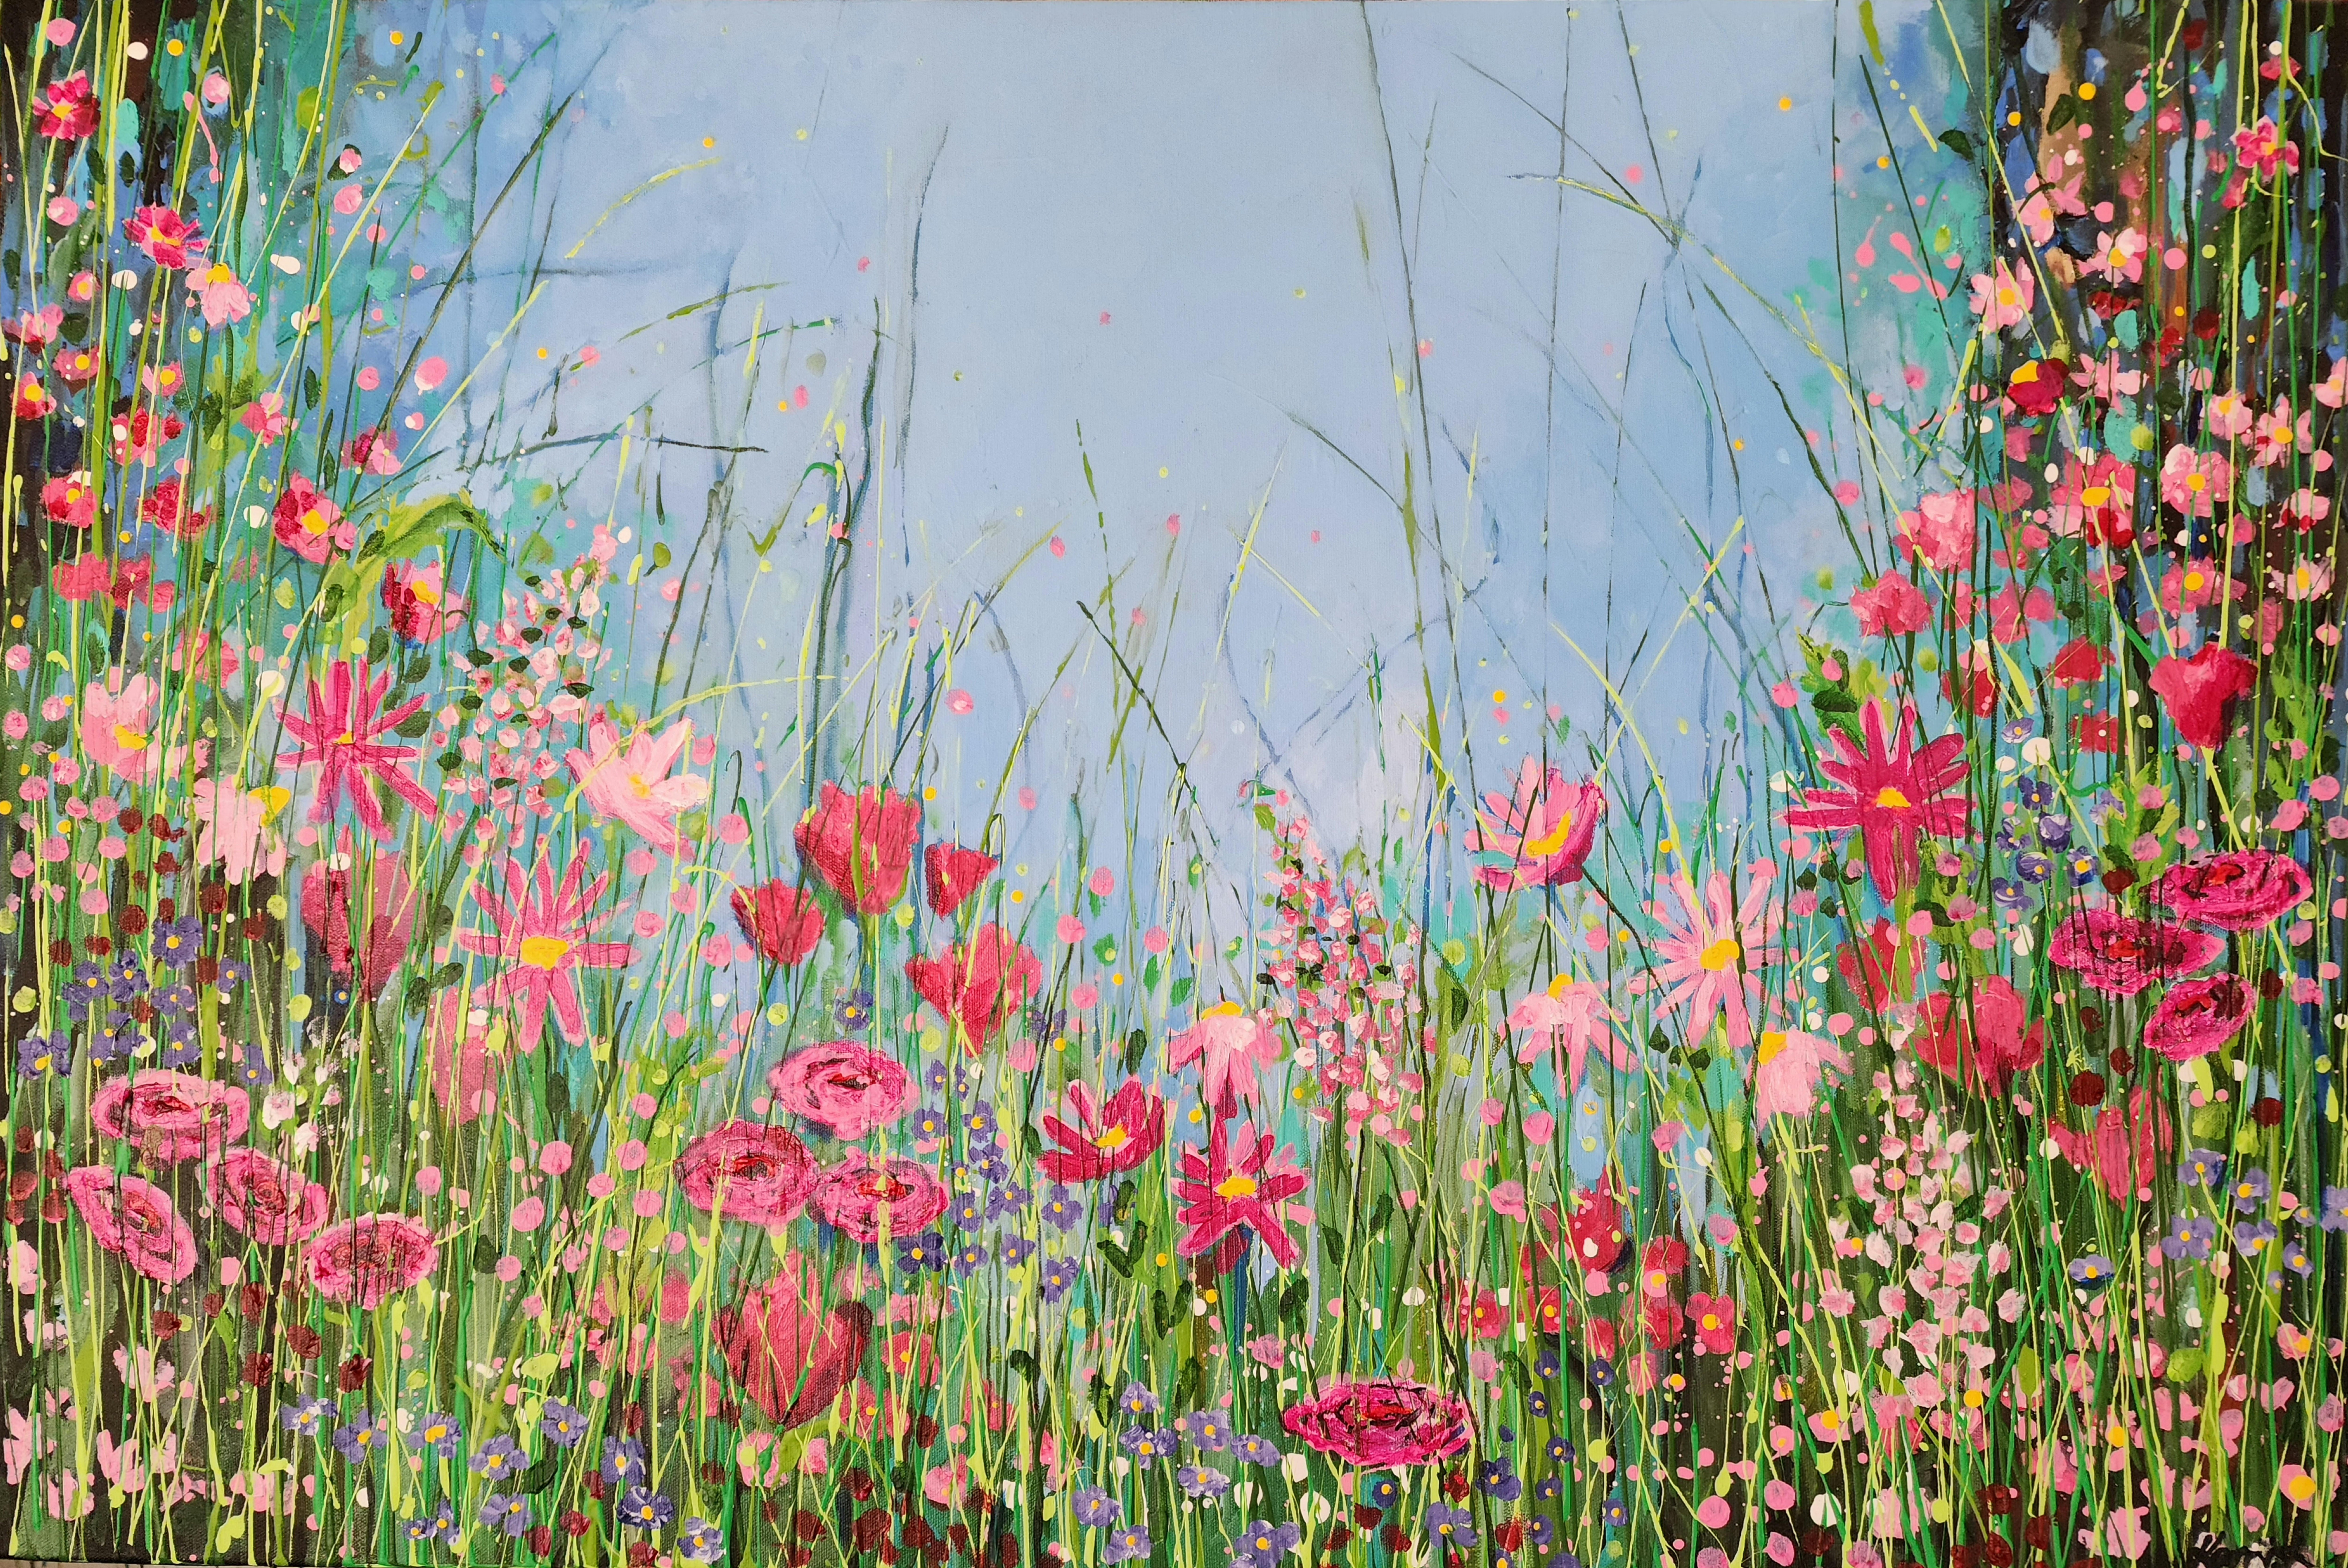 Karnish Art Landscape Painting - Enchanted - Joy-bringers in Pink - Floral Meadow Flowers Soft Abstract Invest